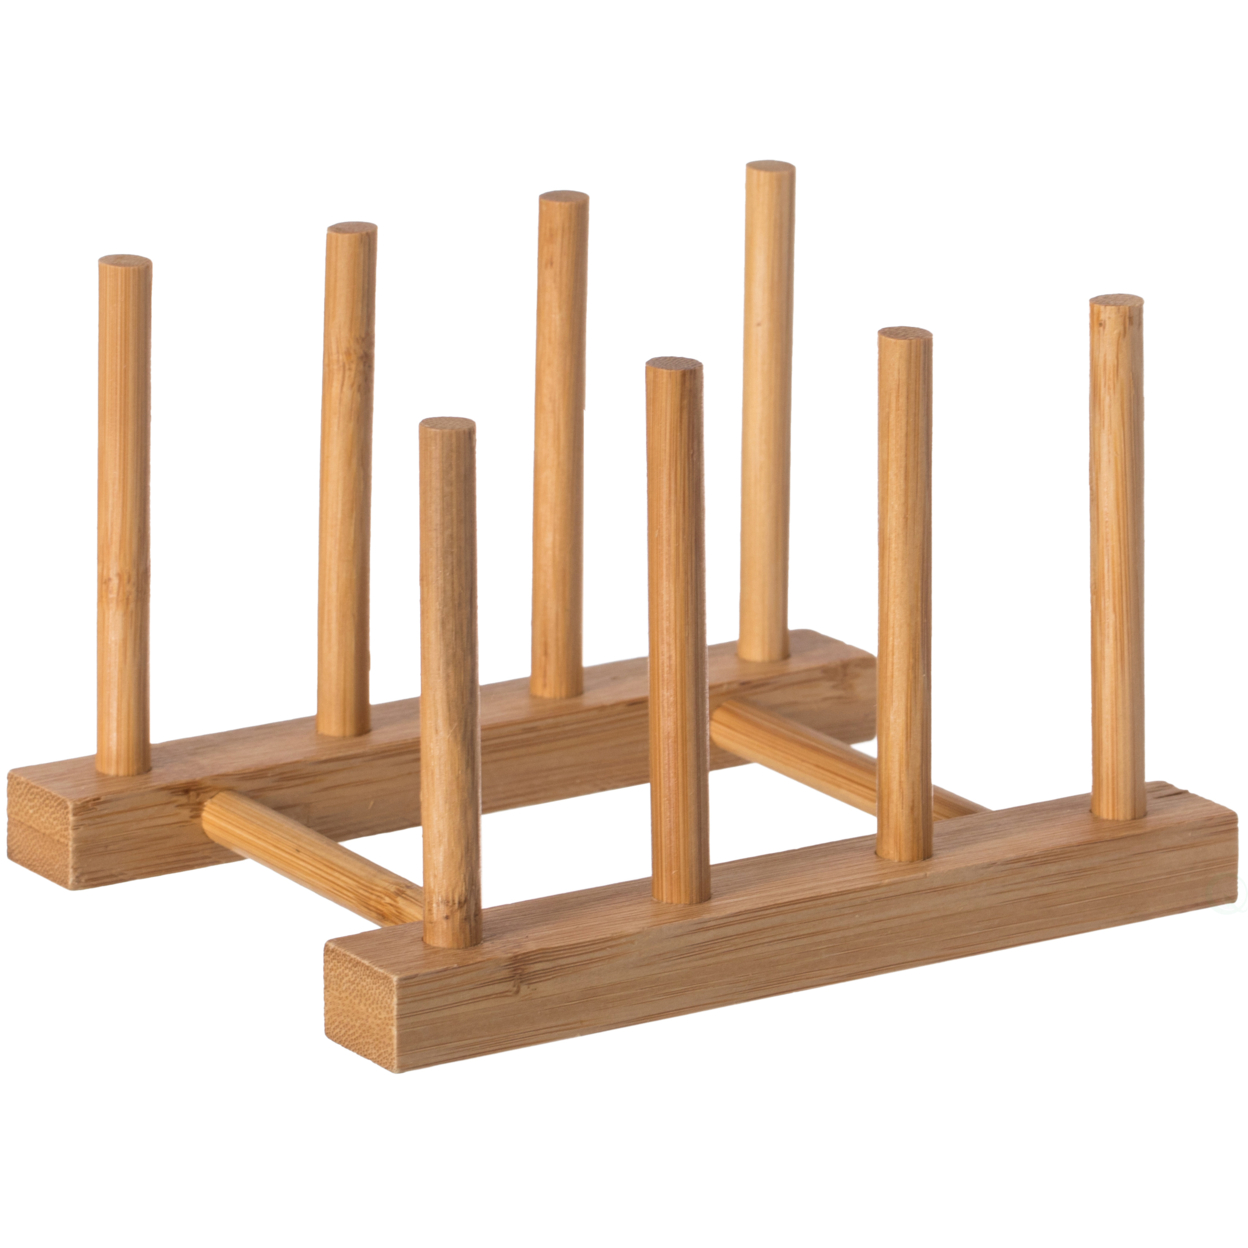 Set Of 2 Bamboo Wooden Dish Drainer Rack, Plate Rack, And Drying Drainer - 2 Grid